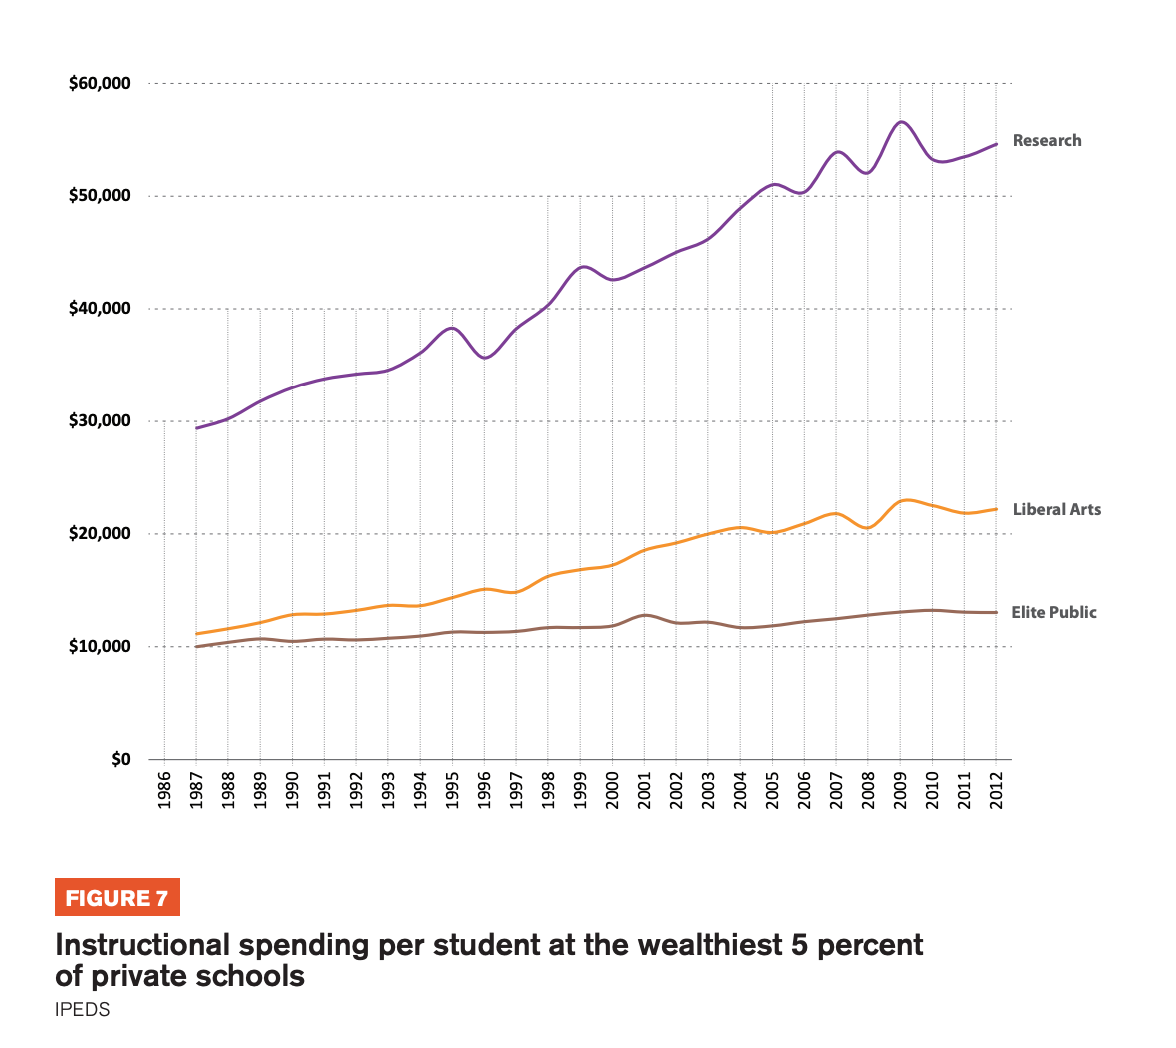 Figure 7 includes a graph showcasing instructional spending per student at the wealthiest 5 percent of private schools